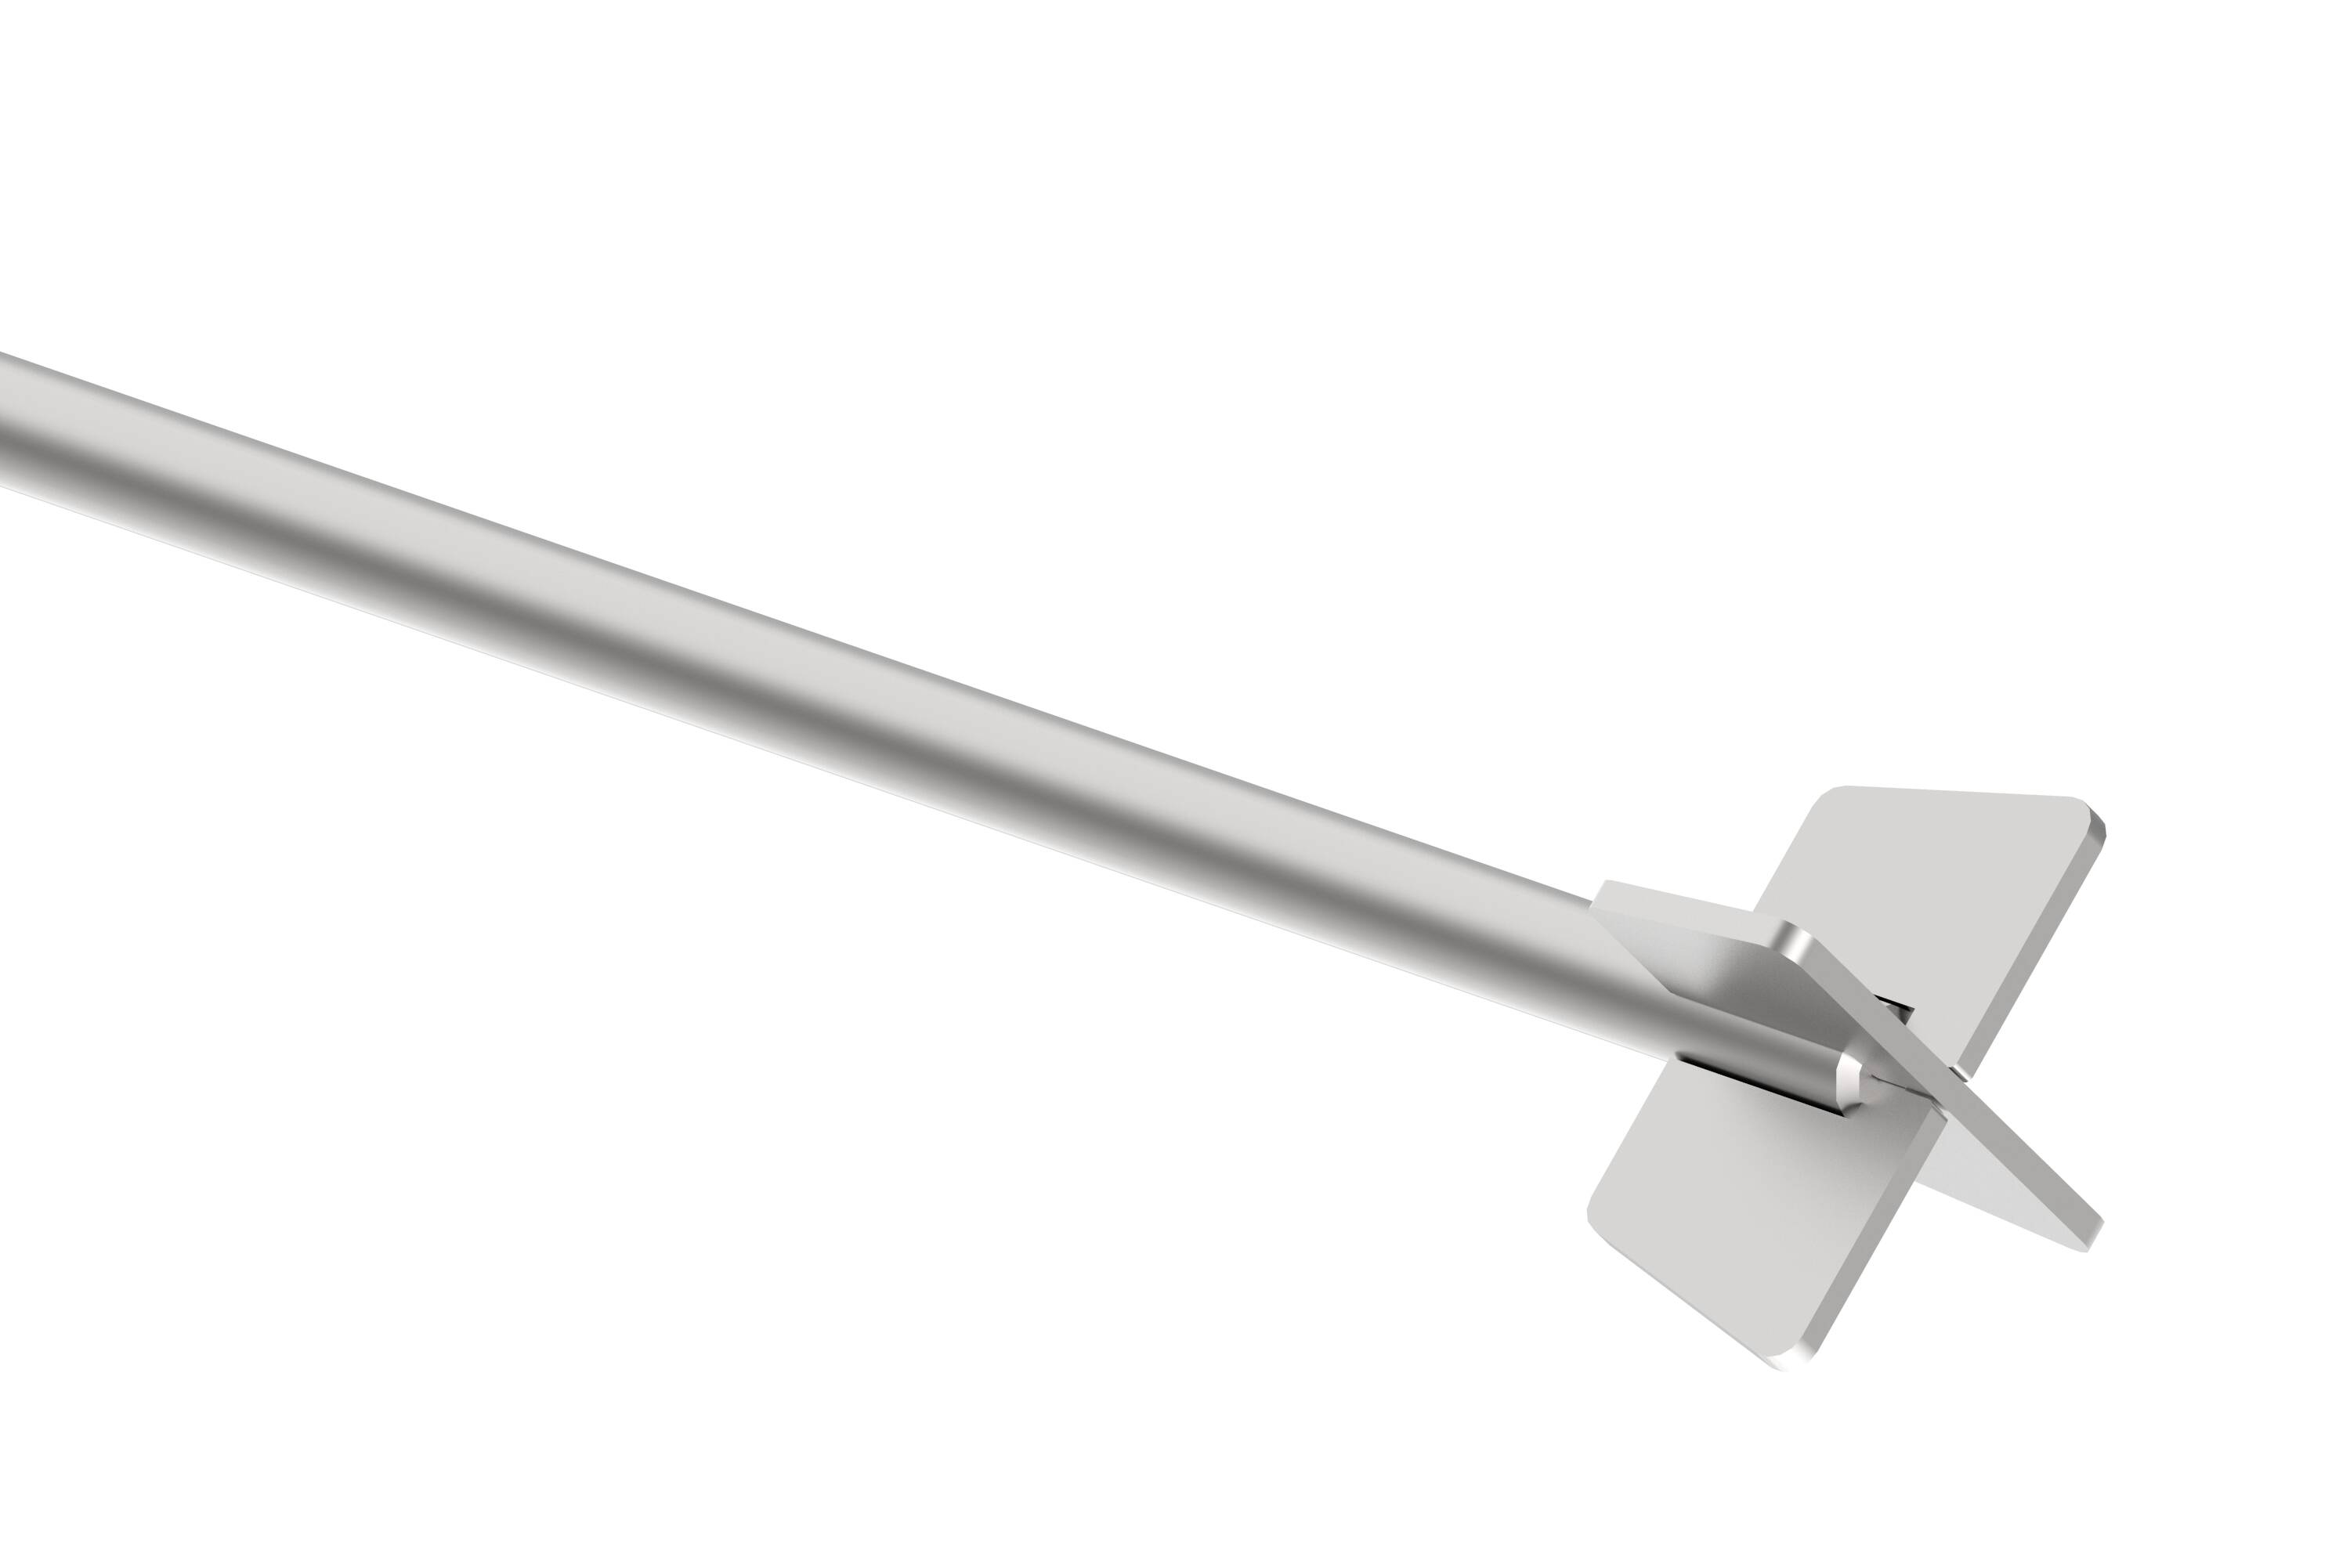 Laboratory crossed blade stirrer made out of stainless steel